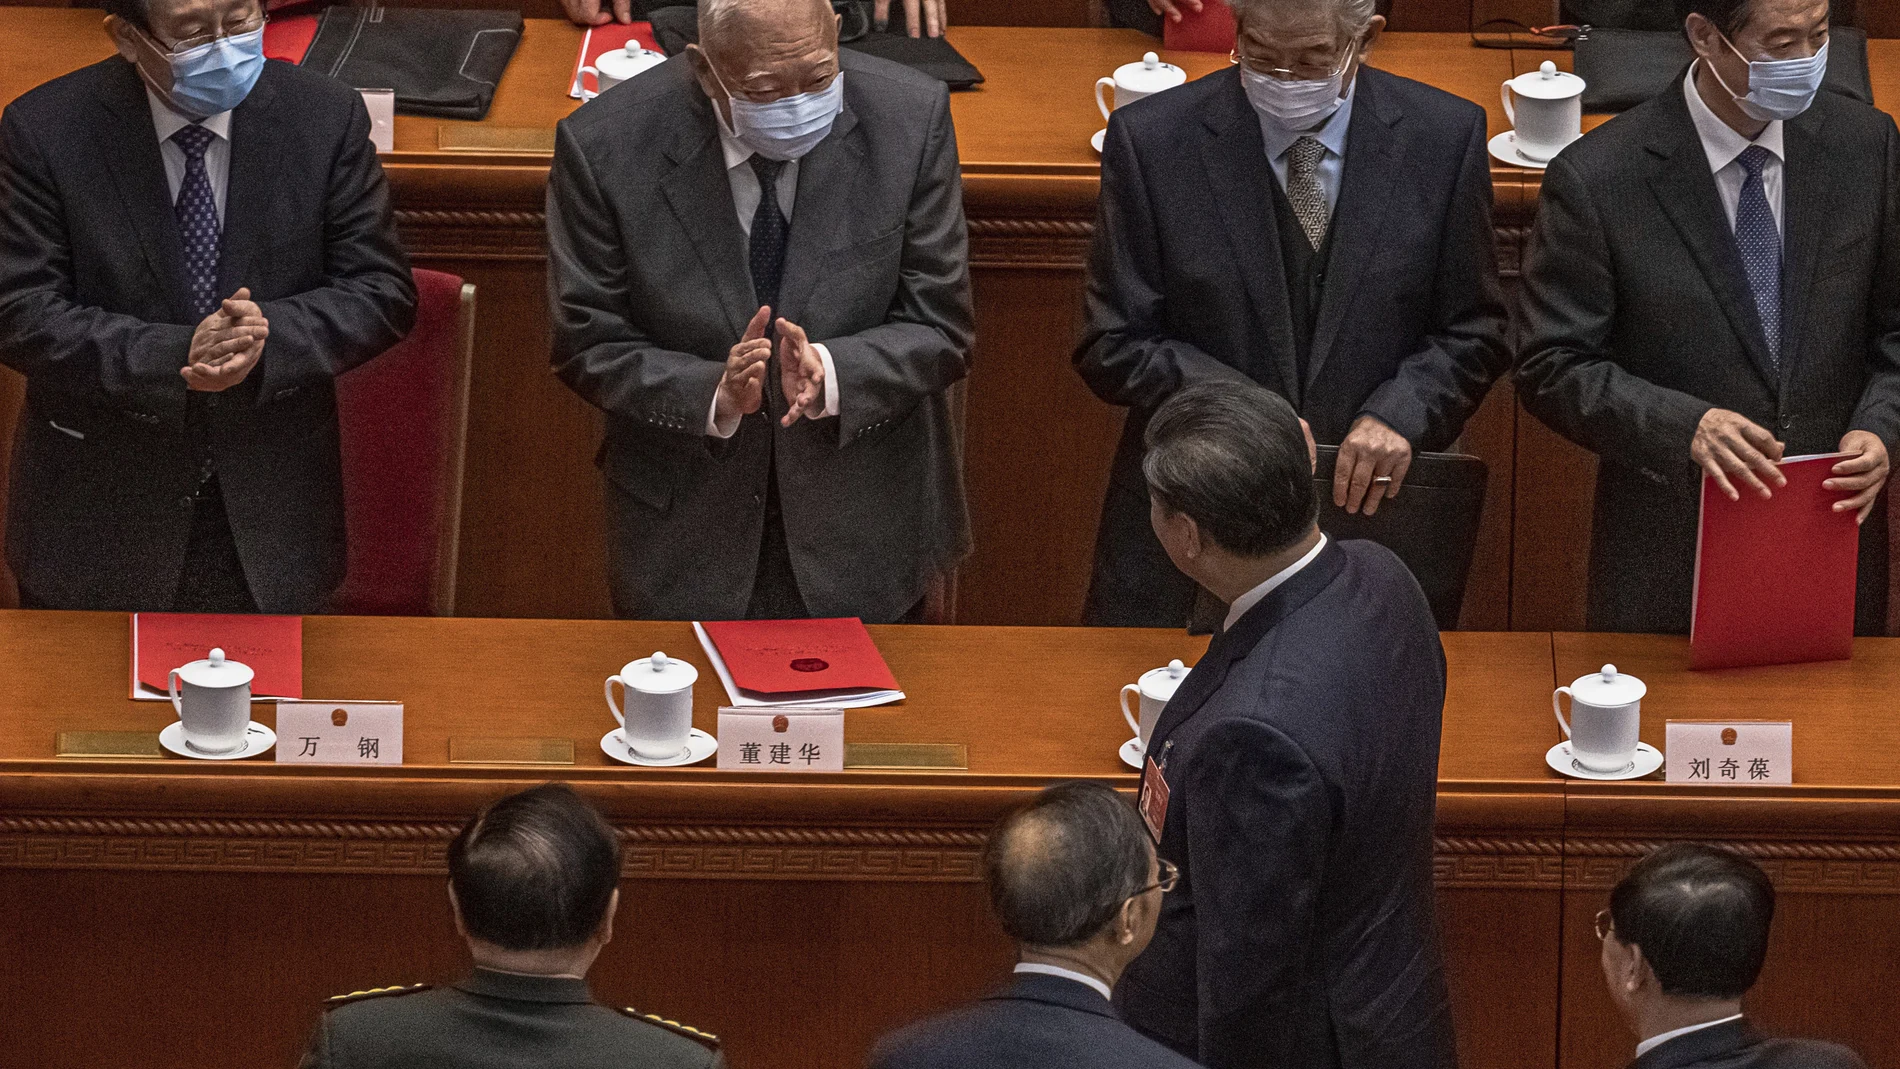 Former Hong Kong Chief Executive Tung Chee-hwa, second left top, claps to Chinese President Xi Jinping leaving after the closing session of the National People's Congress (NPC), at the Great Hall of the People, in Beijing, Thursday, March 11, 2021. Chinaâ€™s ceremonial legislature has endorsed the ruling Communist Partyâ€™s latest move to tighten control over Hong Kong by reducing the role of its public in picking the territoryâ€™s leaders. (Roman Pilipey/Pool Photo via AP)